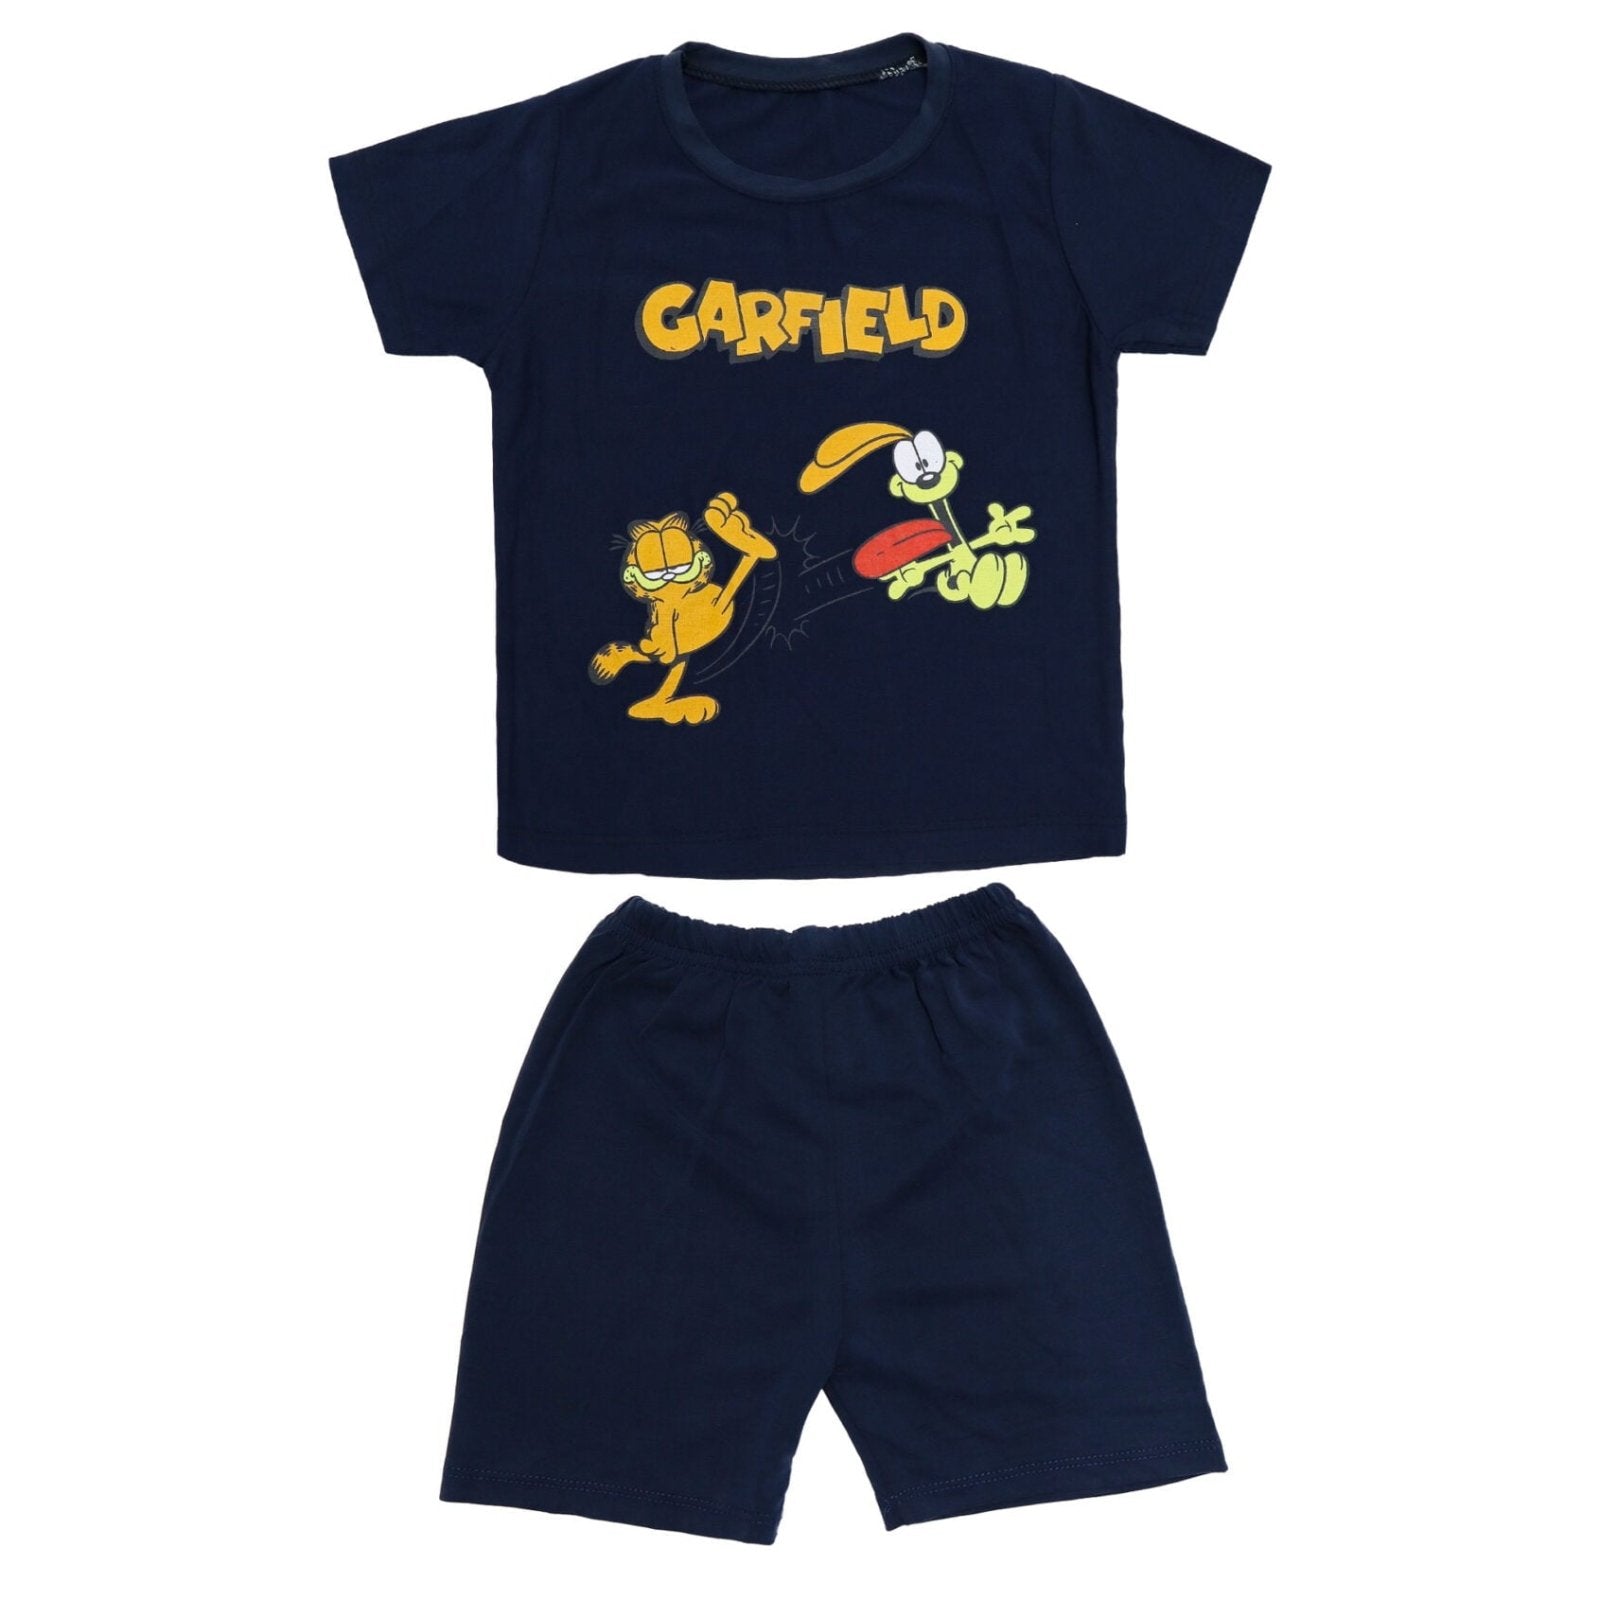 Boys Suit With Short Garfield and Dog by Made In Turkey